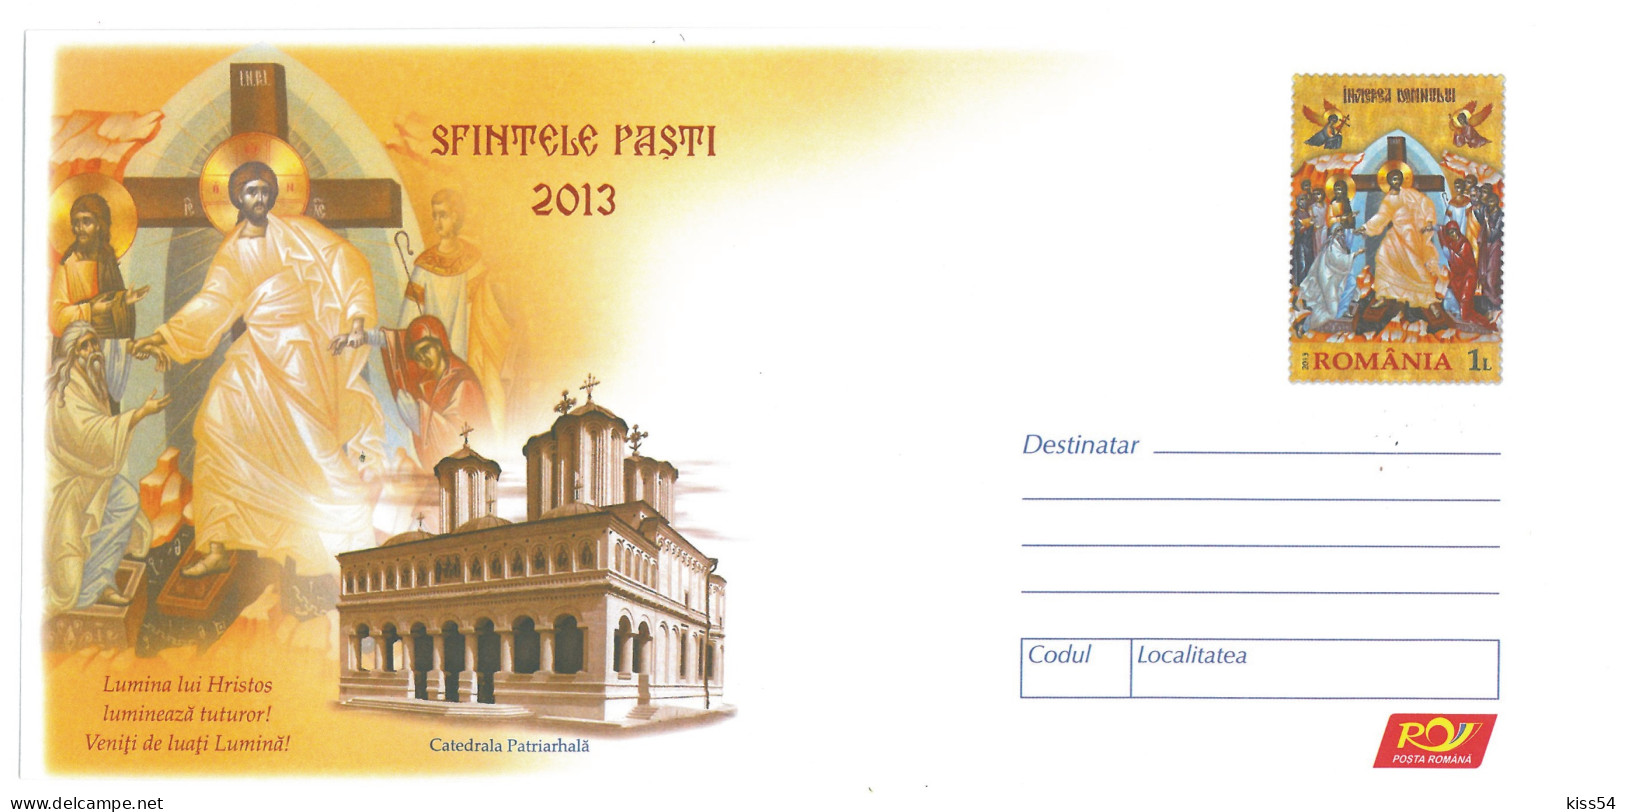 IP 2013 - 2 EASTER, JESUS, Patriarchal Cathedral, Romania - Stationery - Unused - 2013 - Postal Stationery